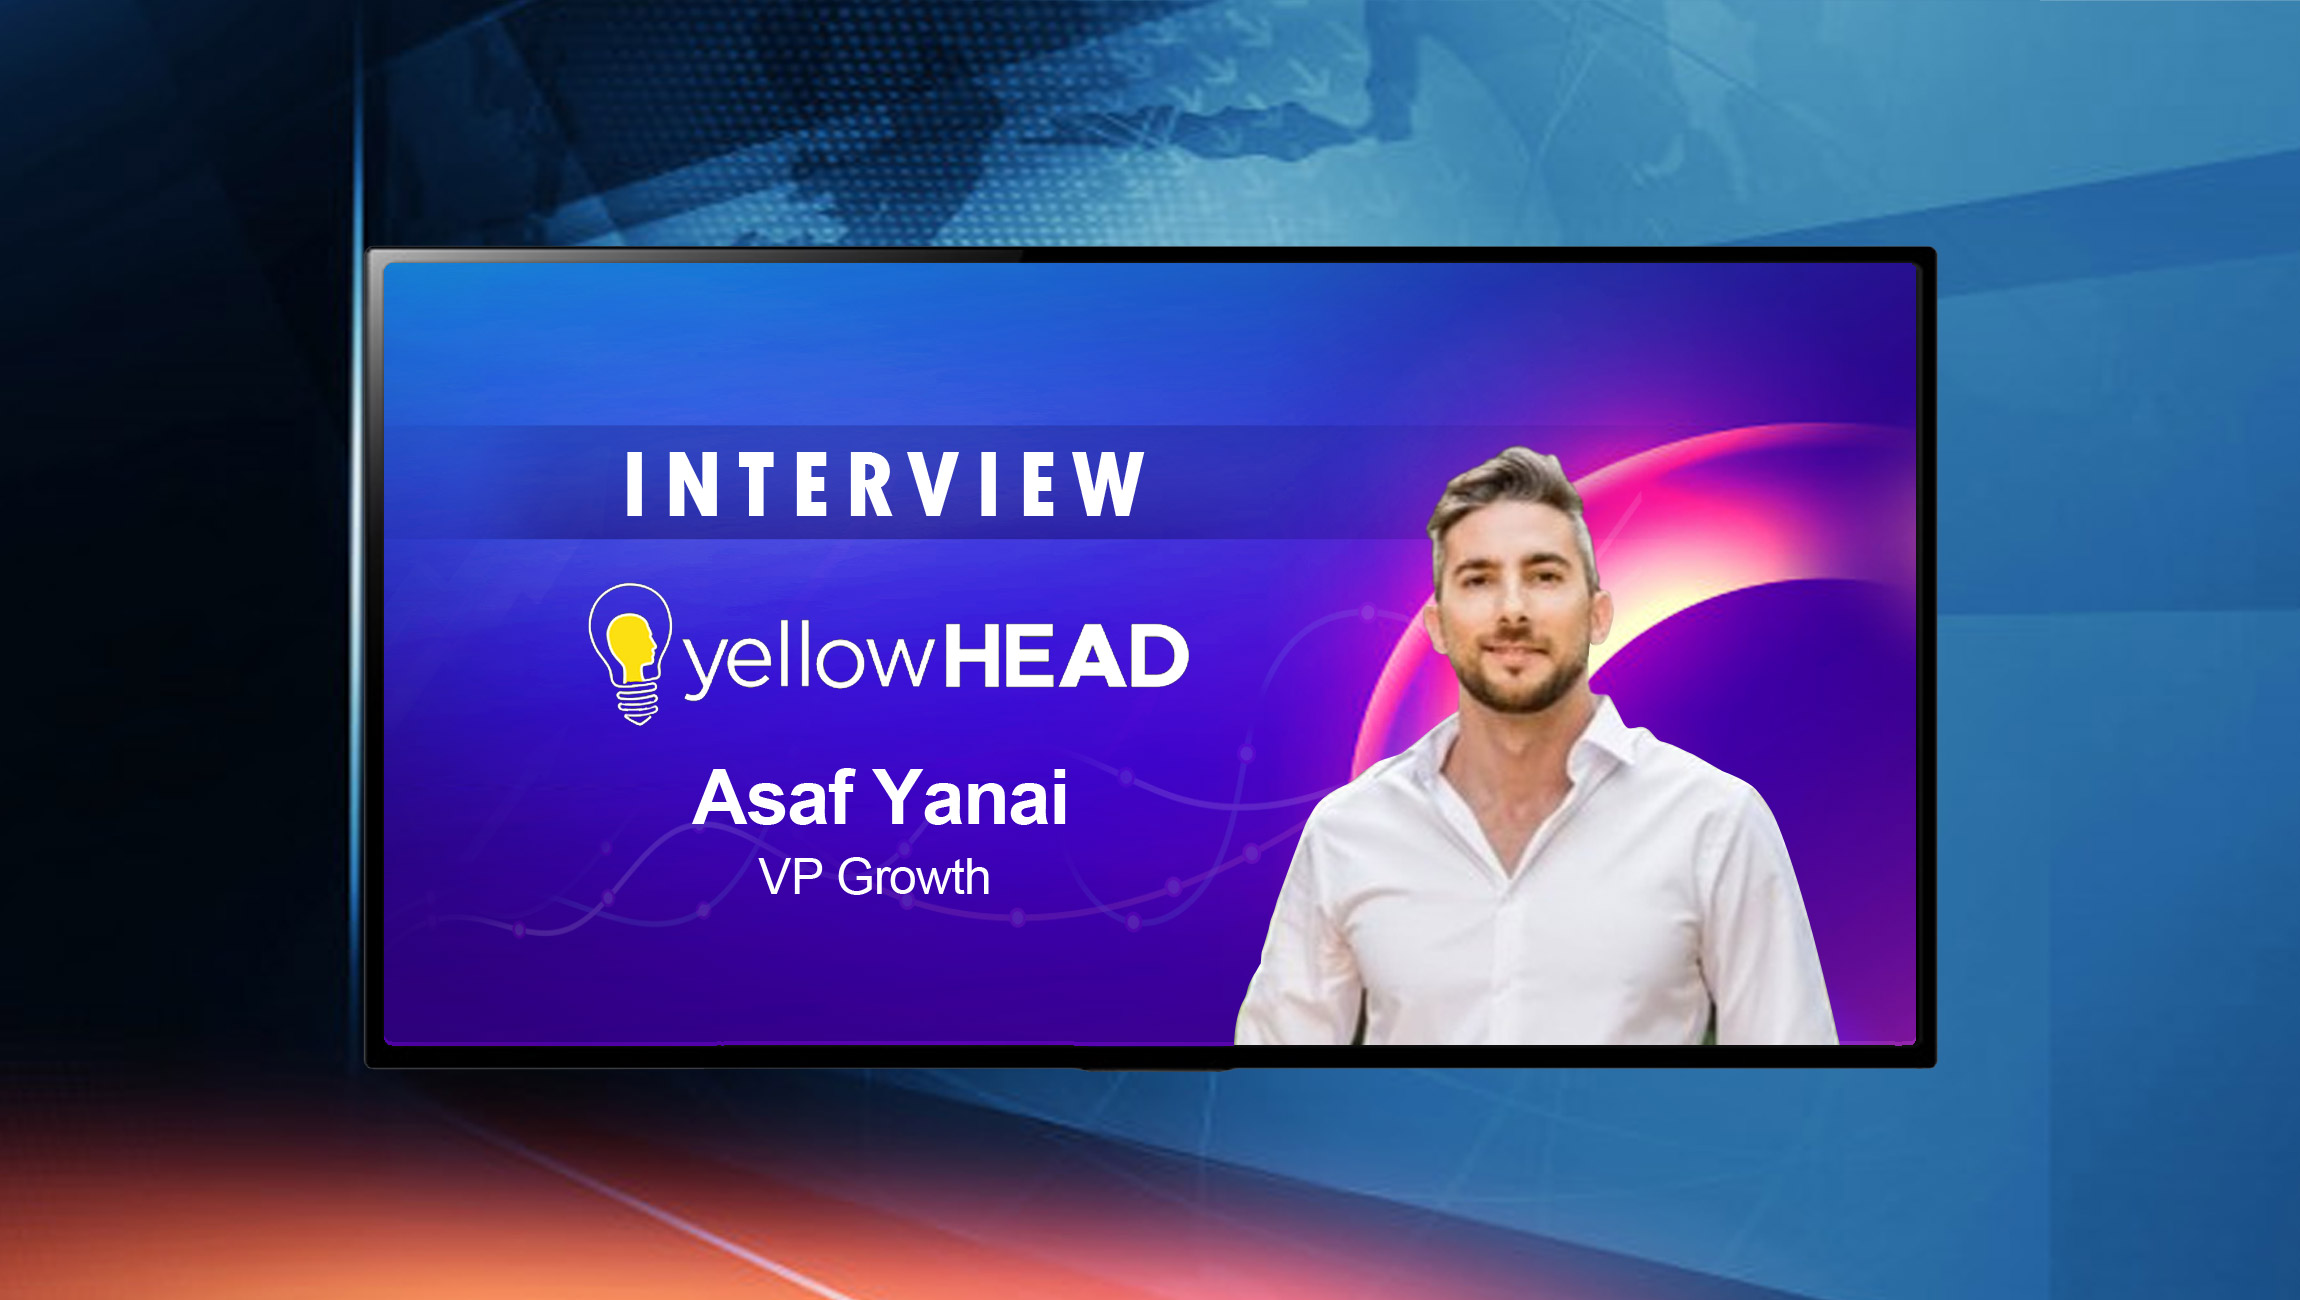 SalesTechStar Interview with Asaf Yanai, VP Growth at yellowHEAD